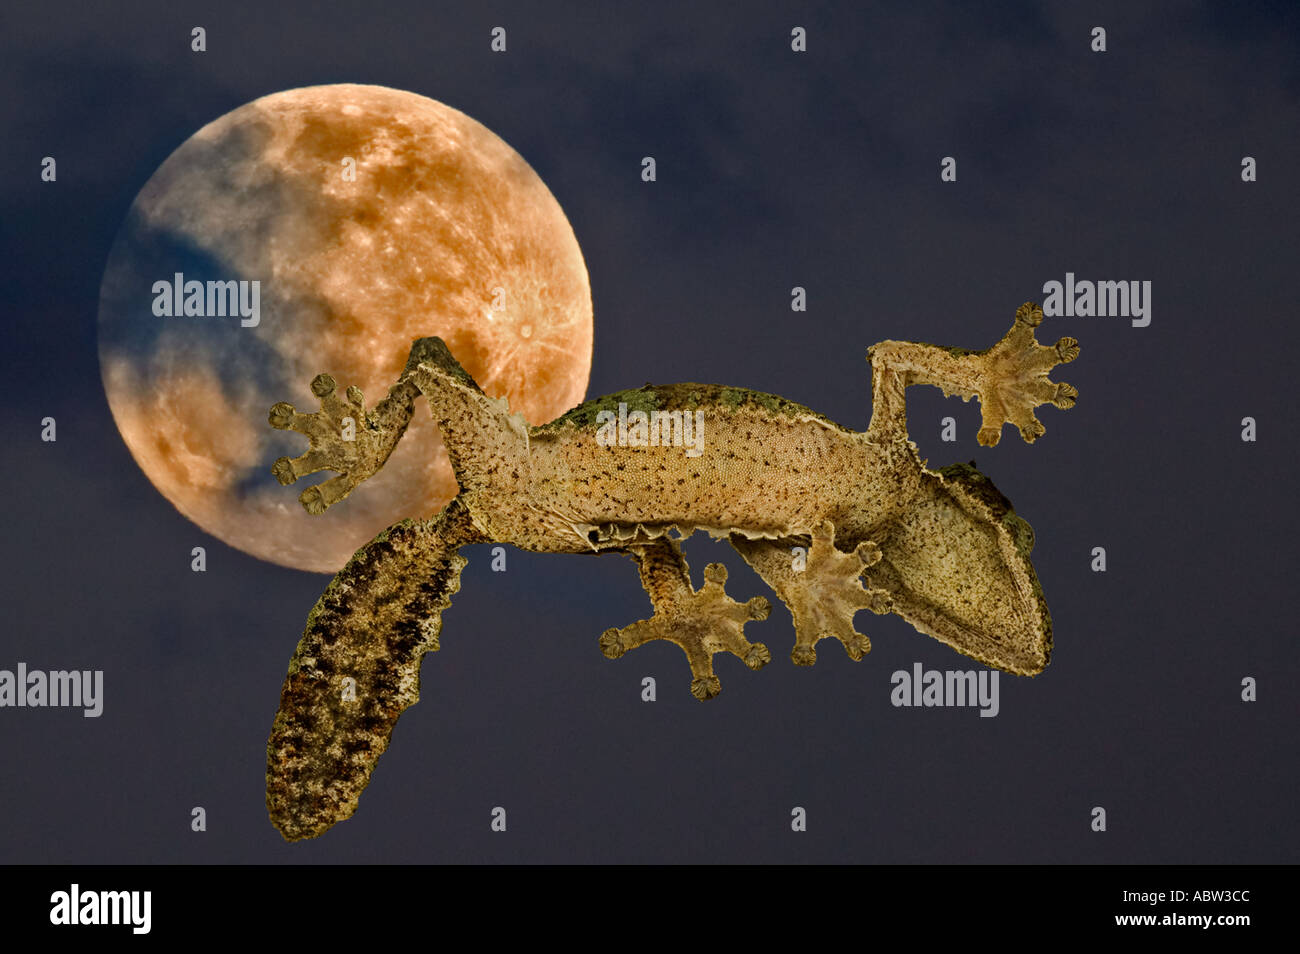 Fringed gecko Uroplatus henkeli From below showing specially adapted feet and moon in the background Madagascar Stock Photo